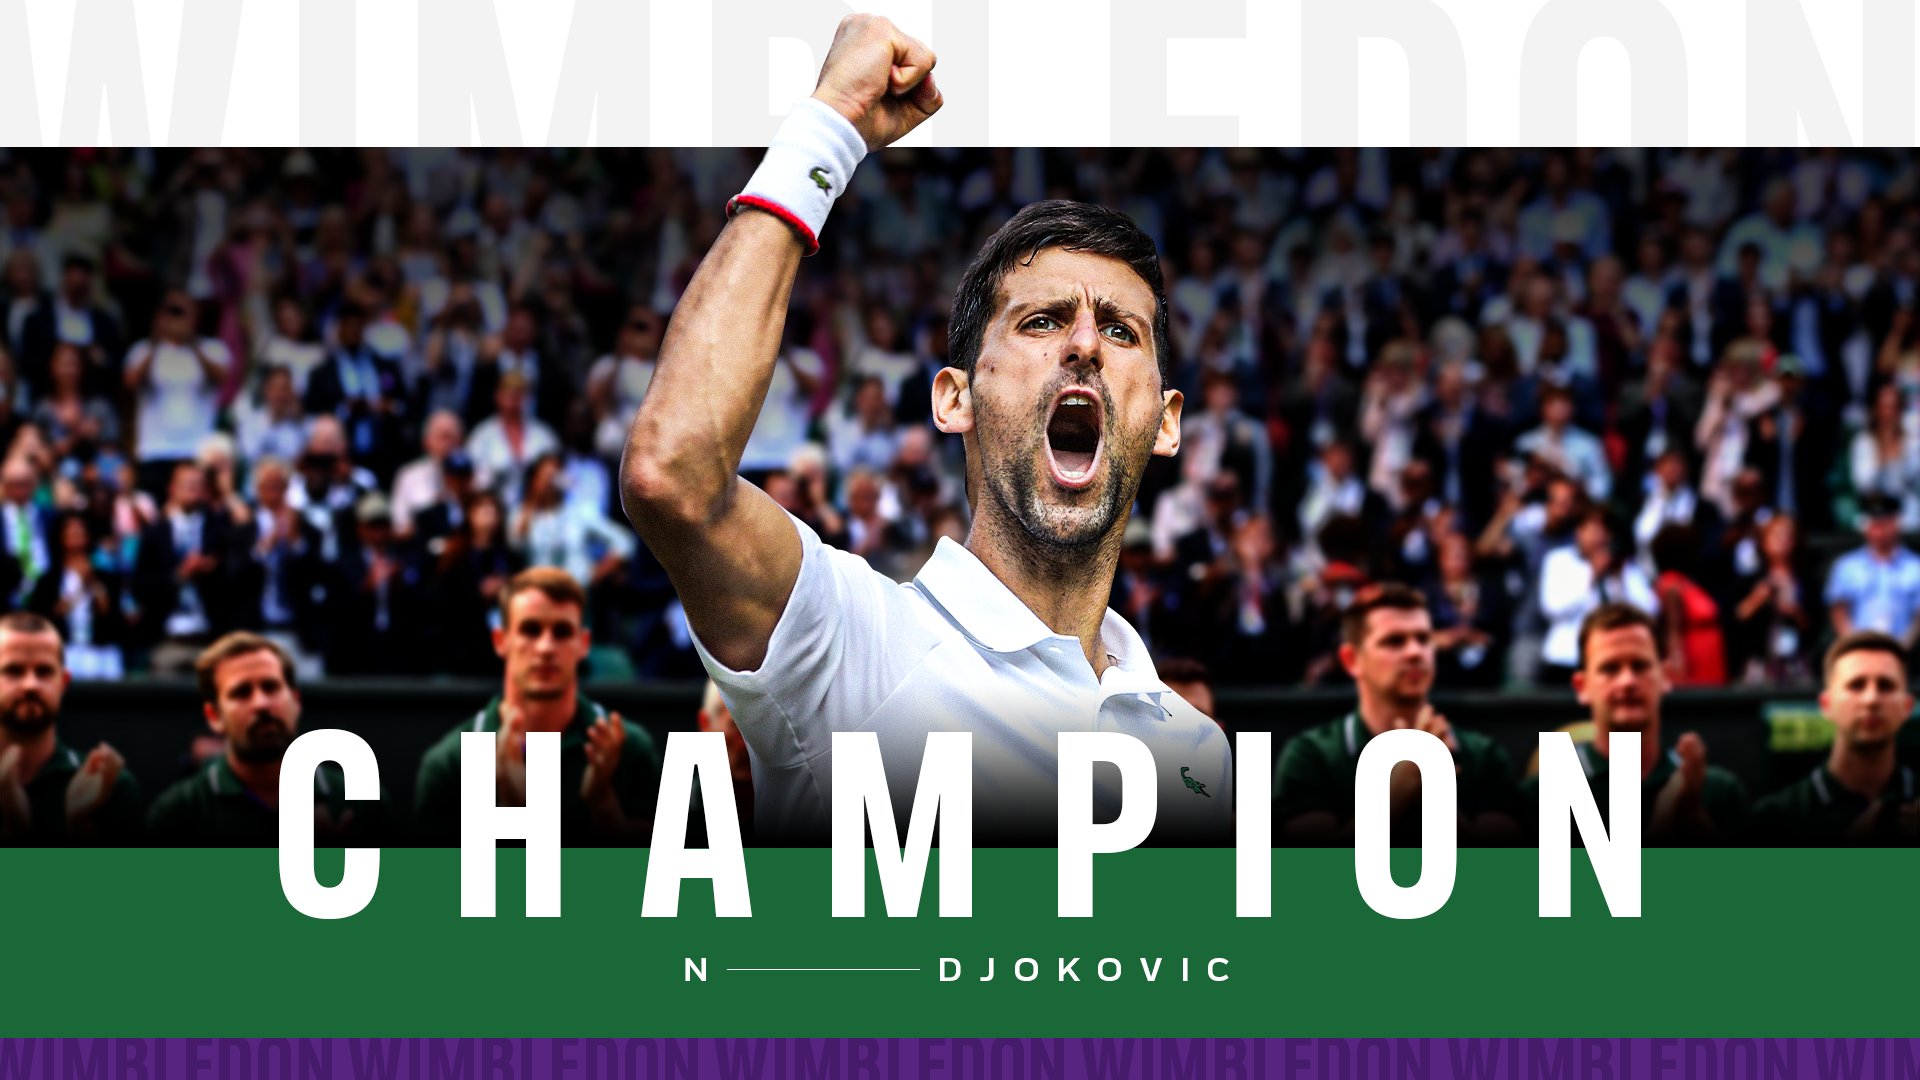 Most Grand Slams: Novak Djokovic wins sixth Wimbledon title, equals record 20th Grand Slam with Roger Federer & Rafael Nadal- check out